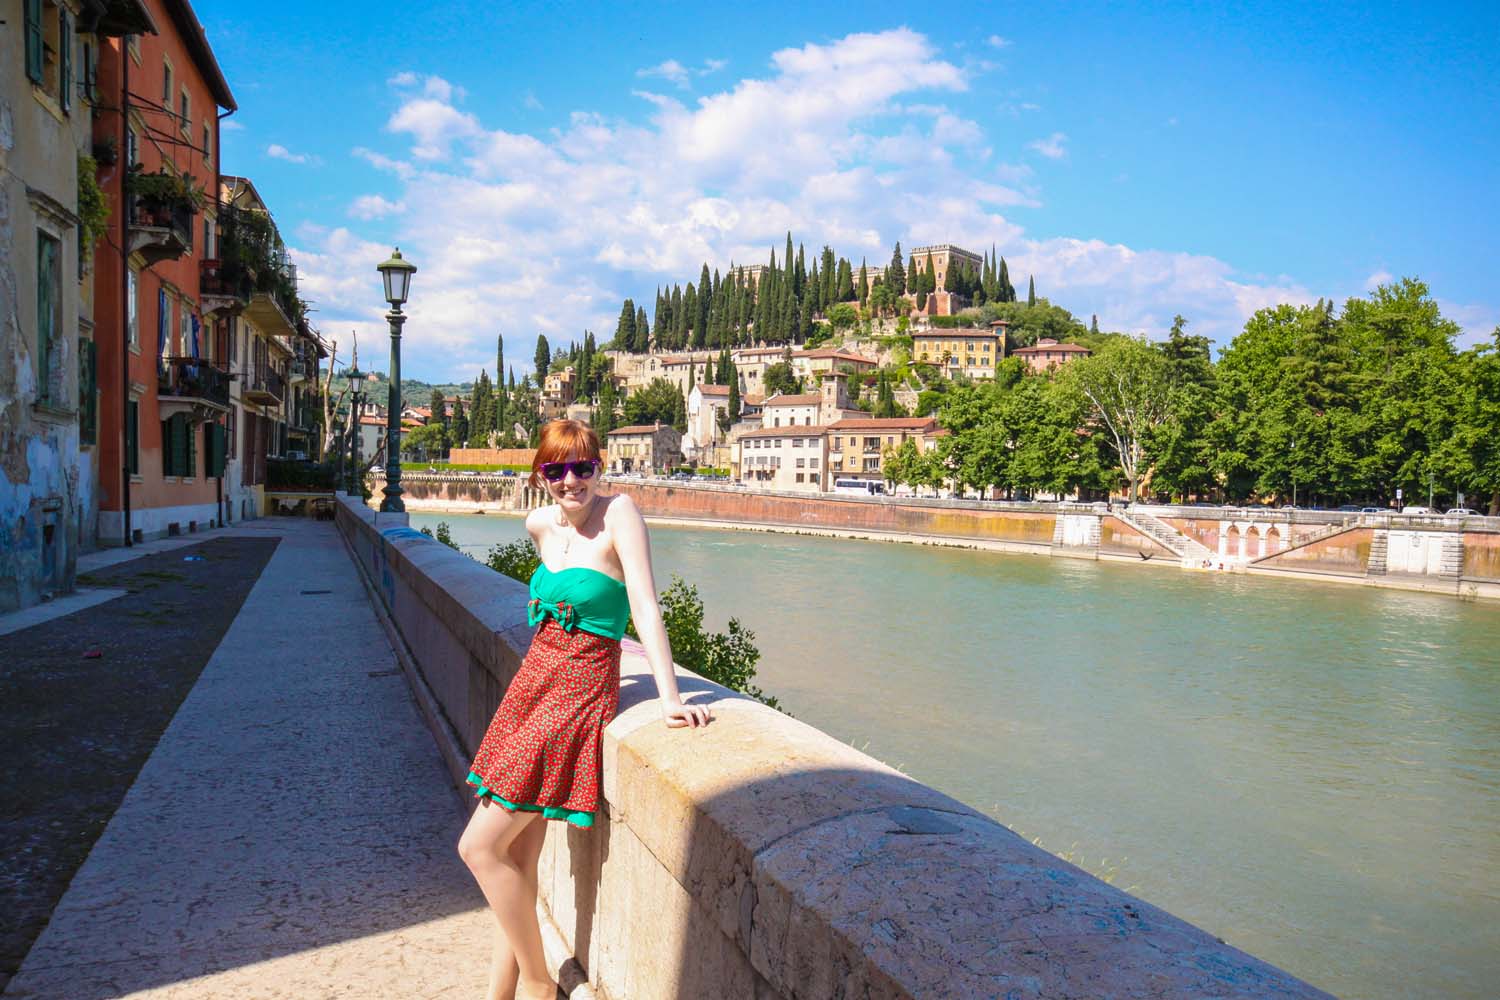 A One Day in Verona Itinerary You'll Want to Steal